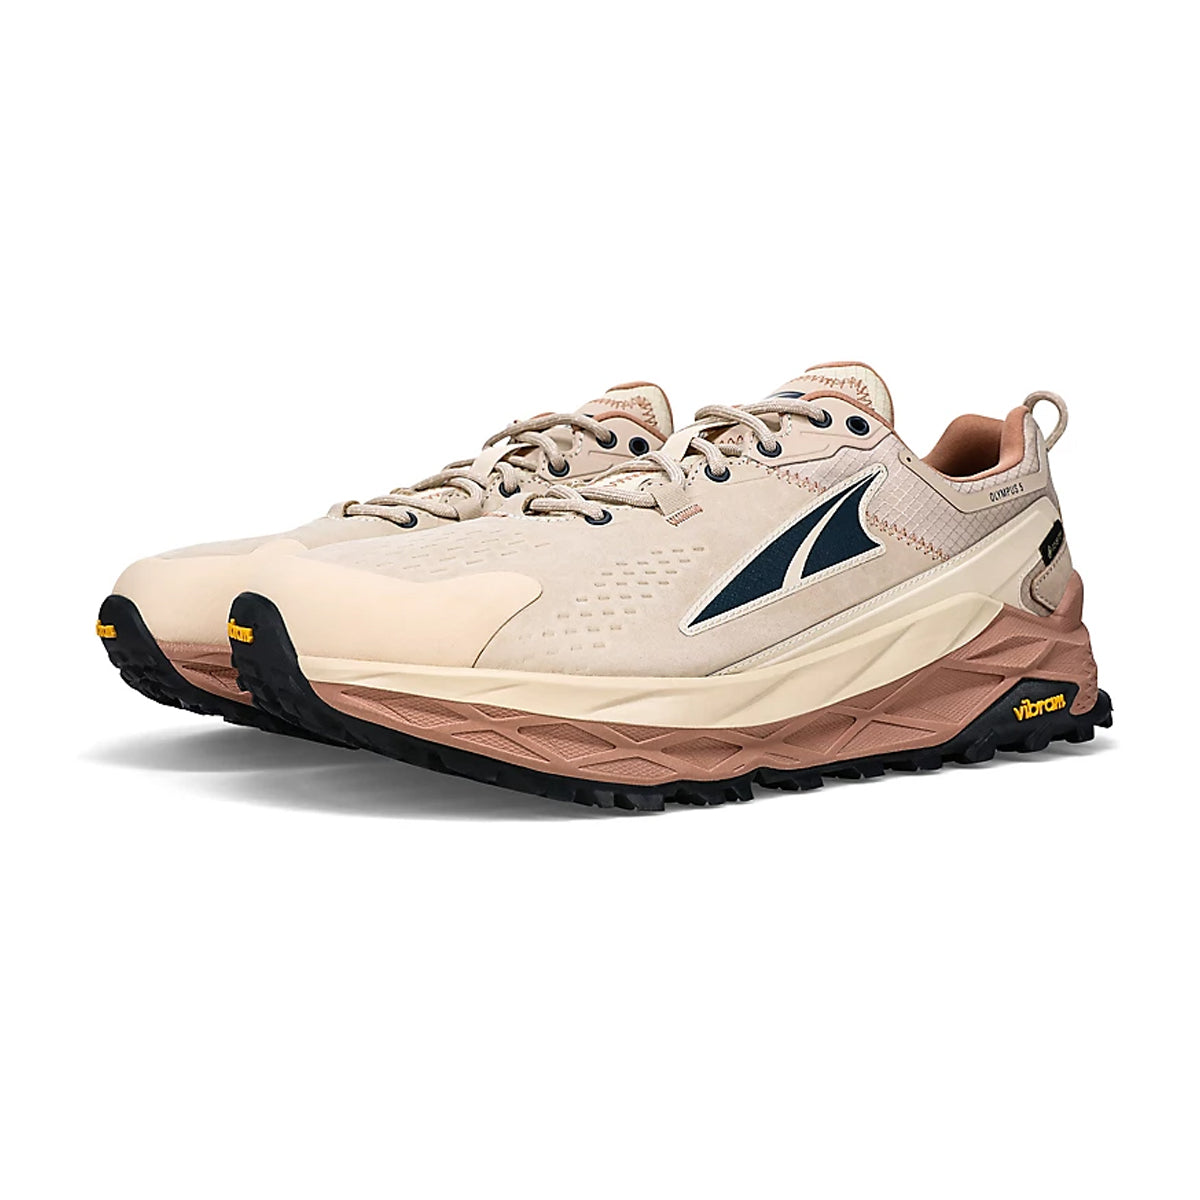 Altra Olympus 5 Hike Low GTX in Sand by GOHUNT | Altra - GOHUNT Shop